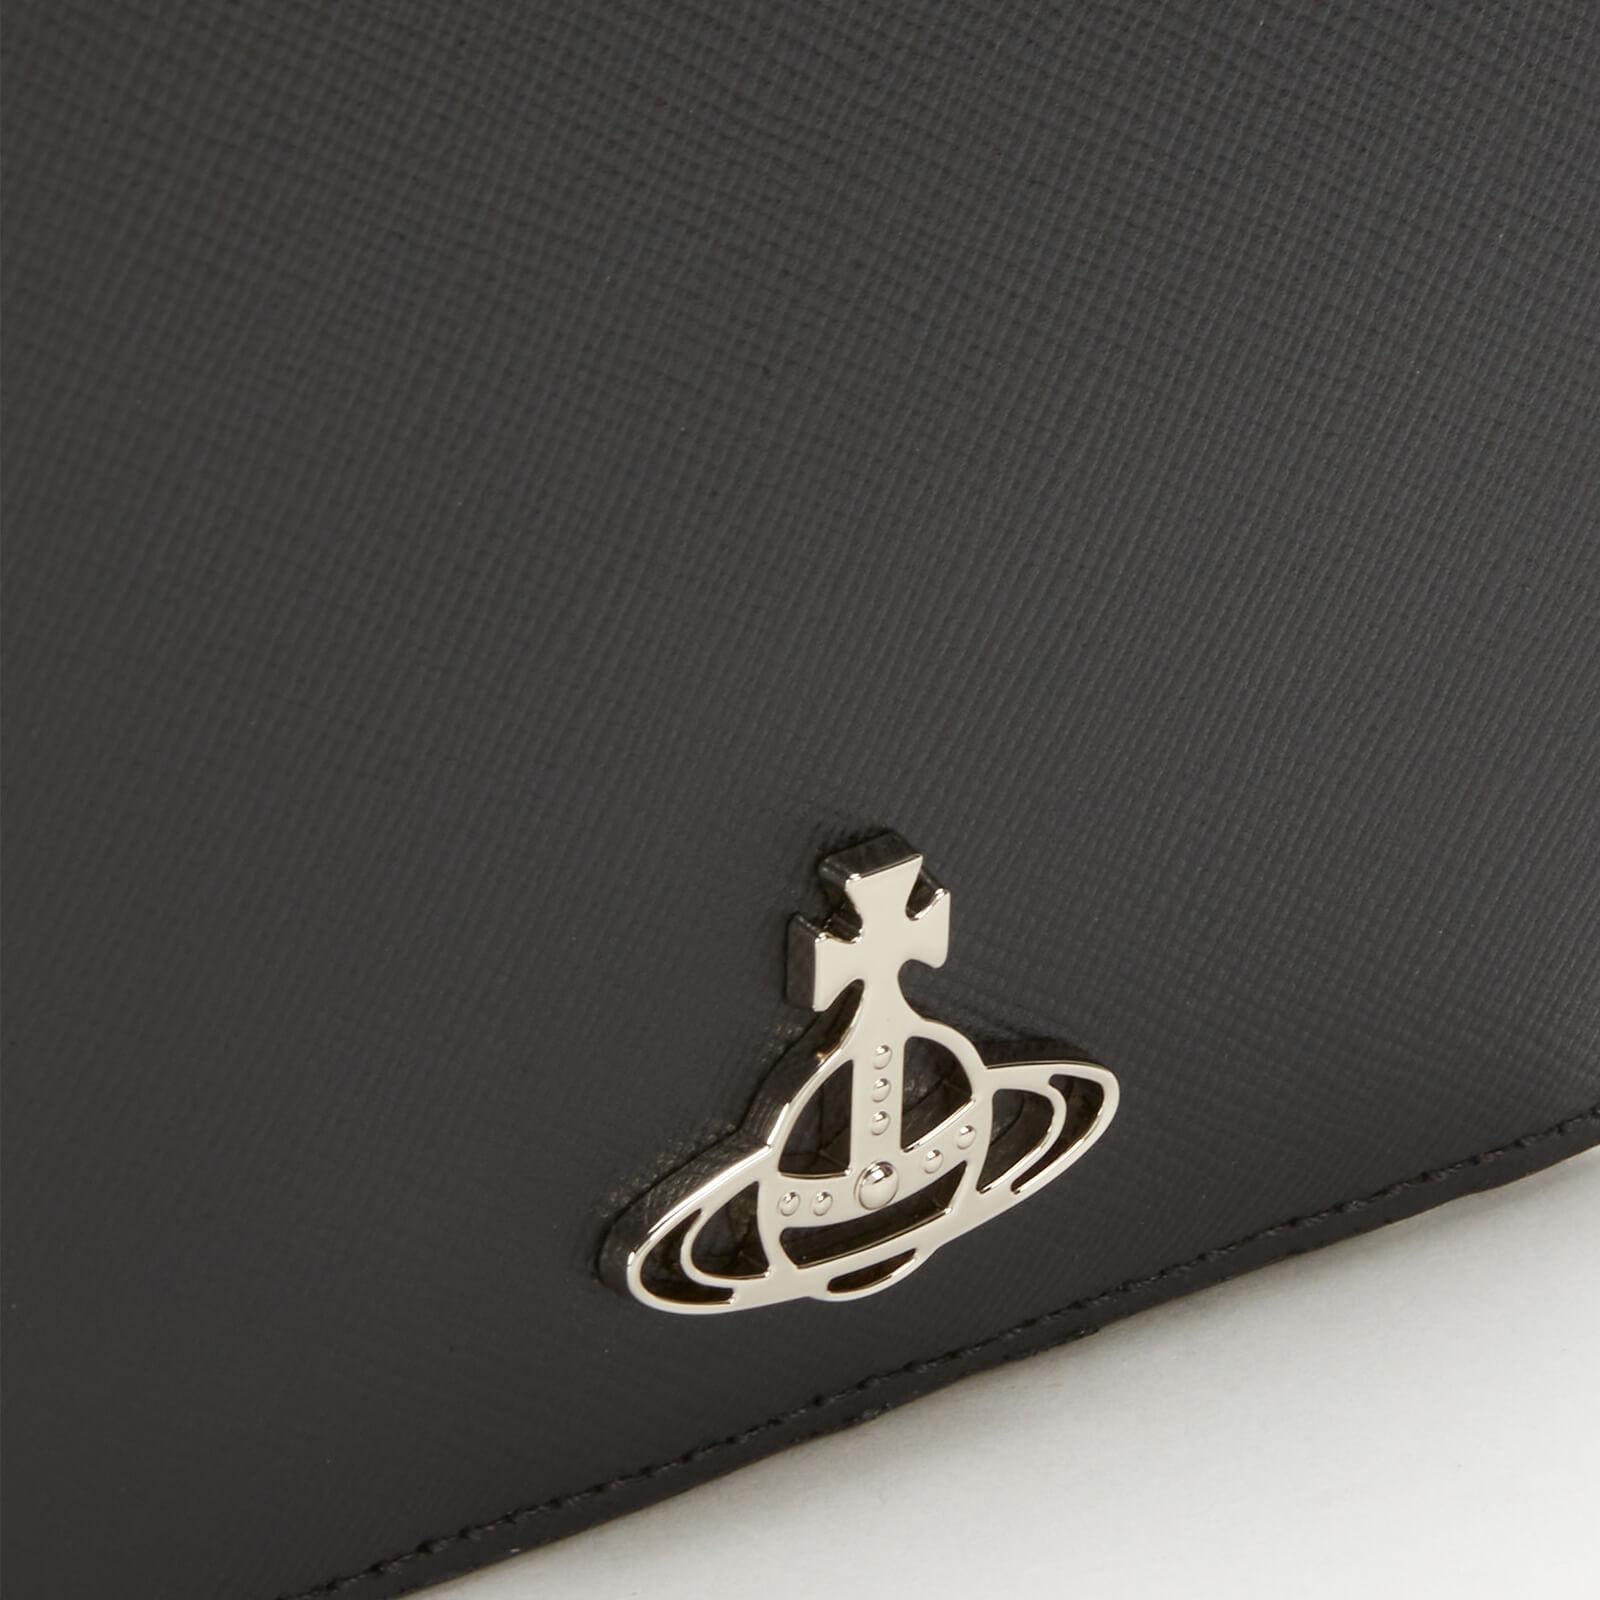 Vivienne Westwood Leather Debbie Card Case With Chain in Black - Lyst